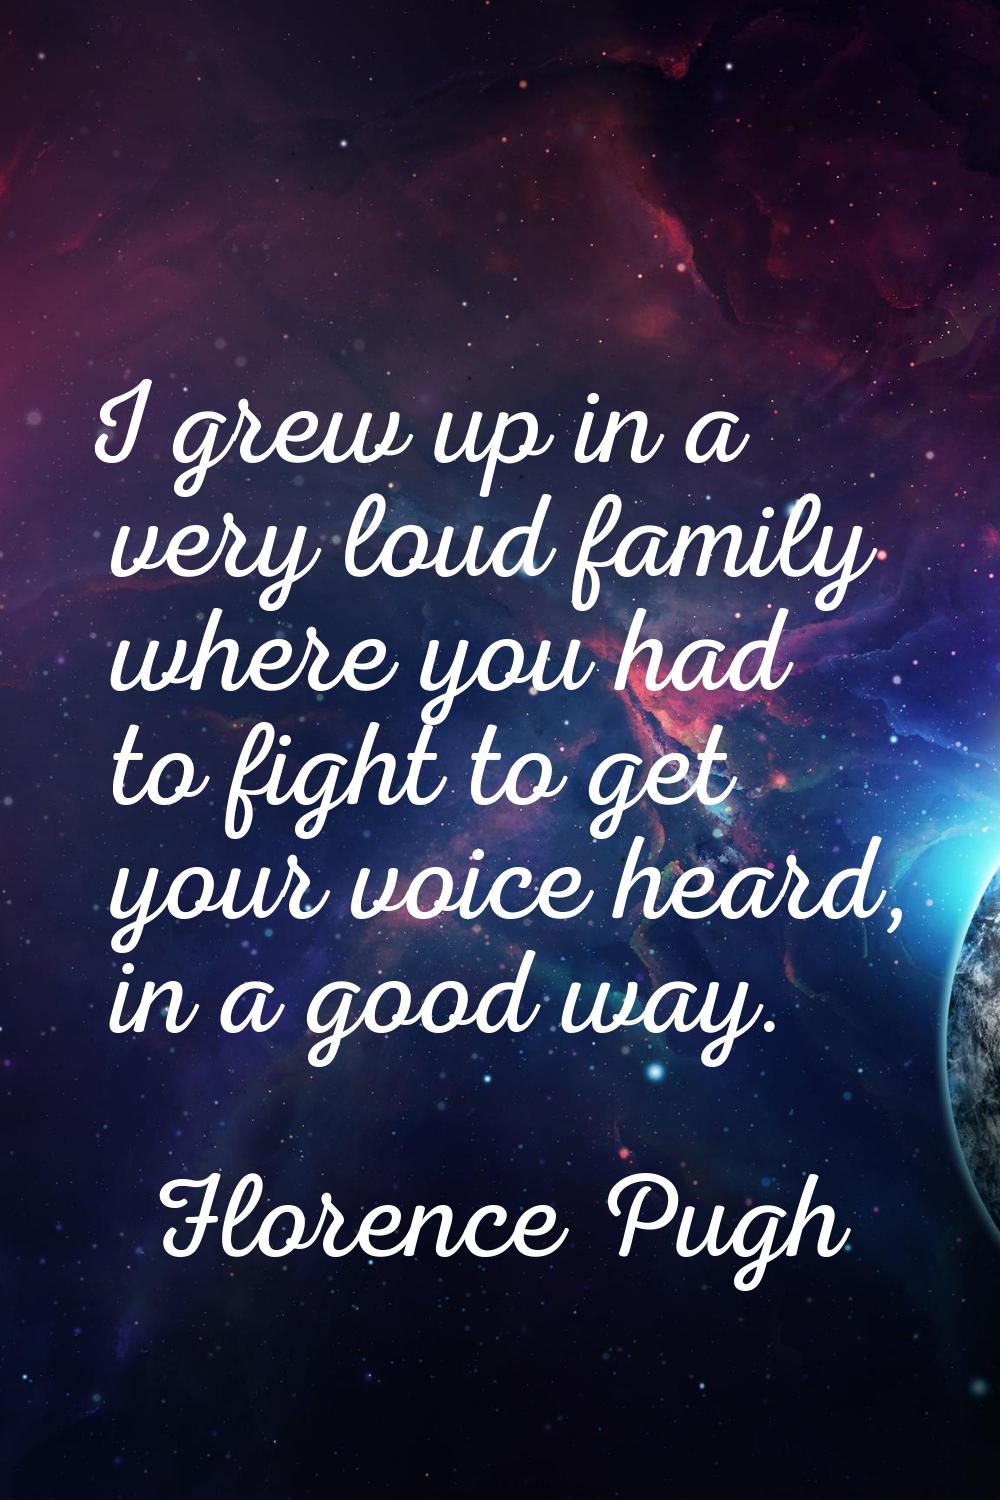 I grew up in a very loud family where you had to fight to get your voice heard, in a good way.